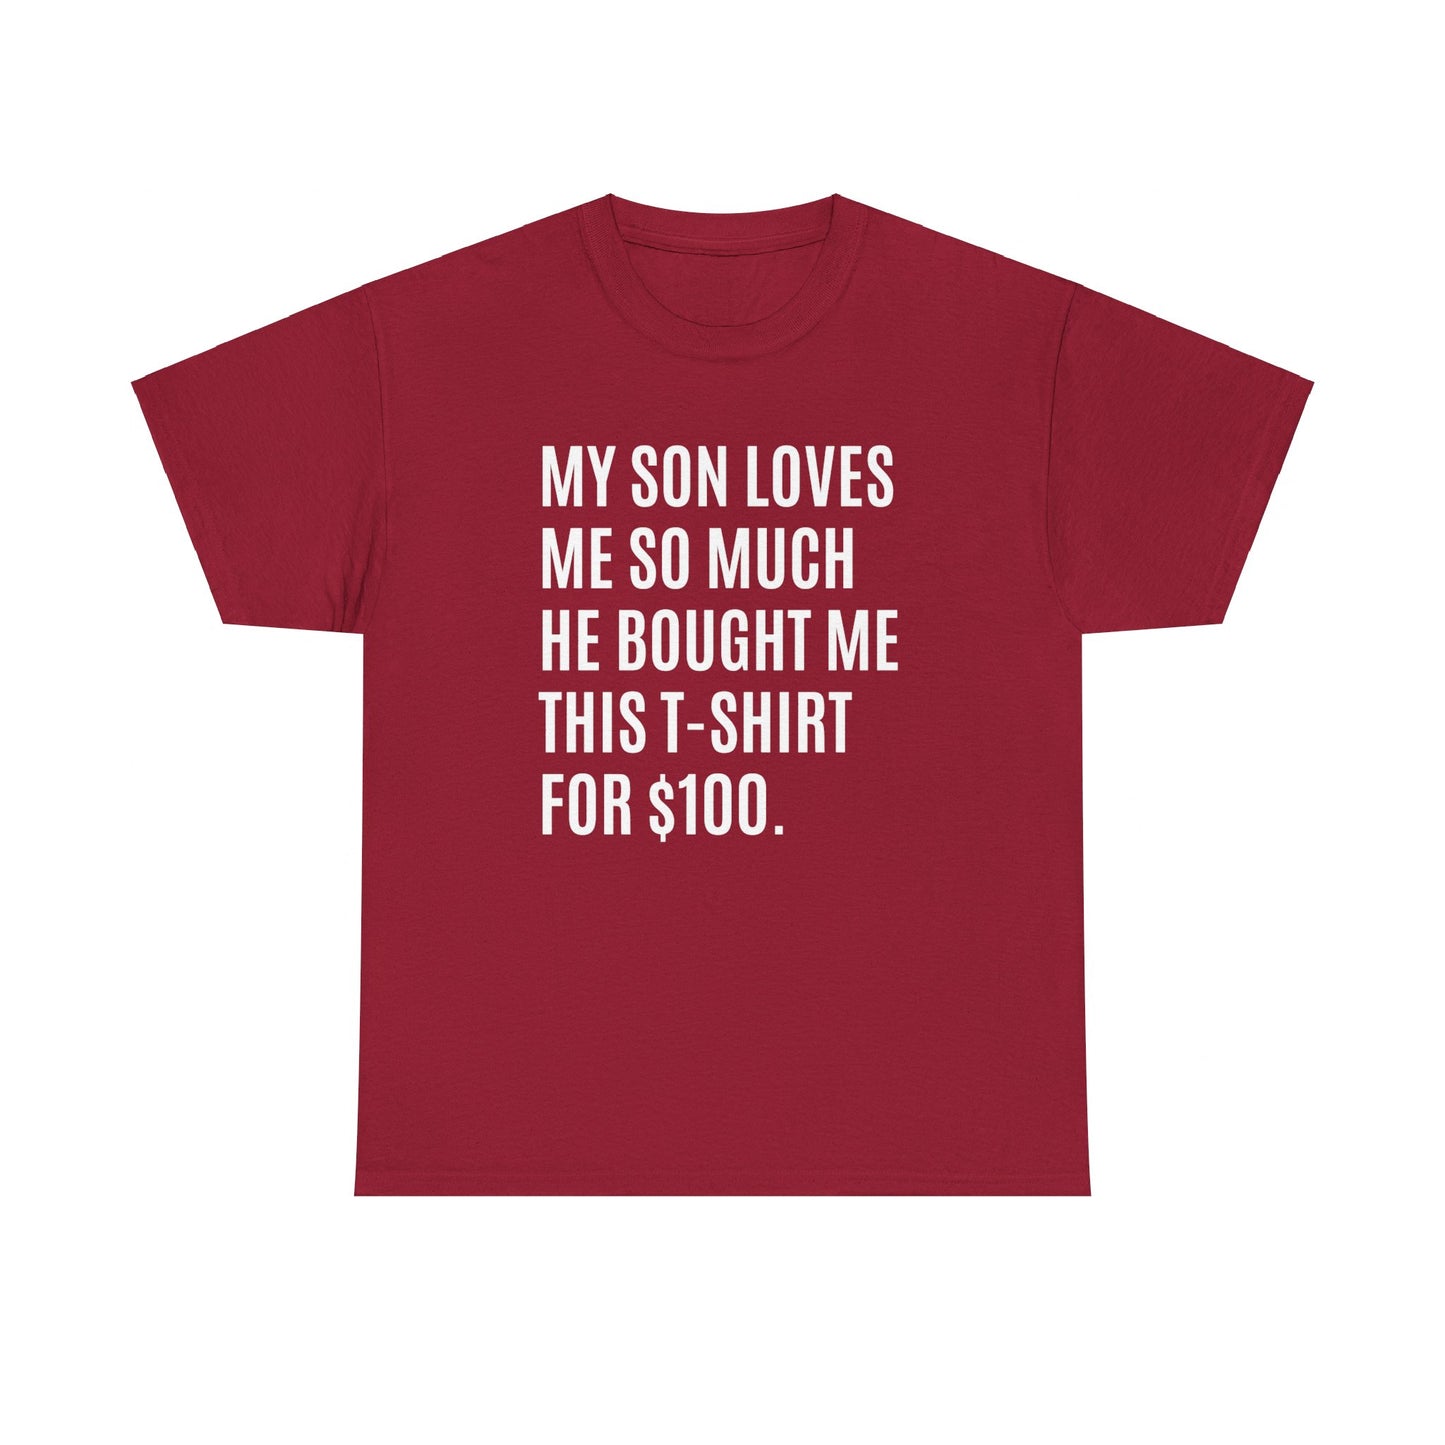 The $100 Father's Day Shirt: Son Edition